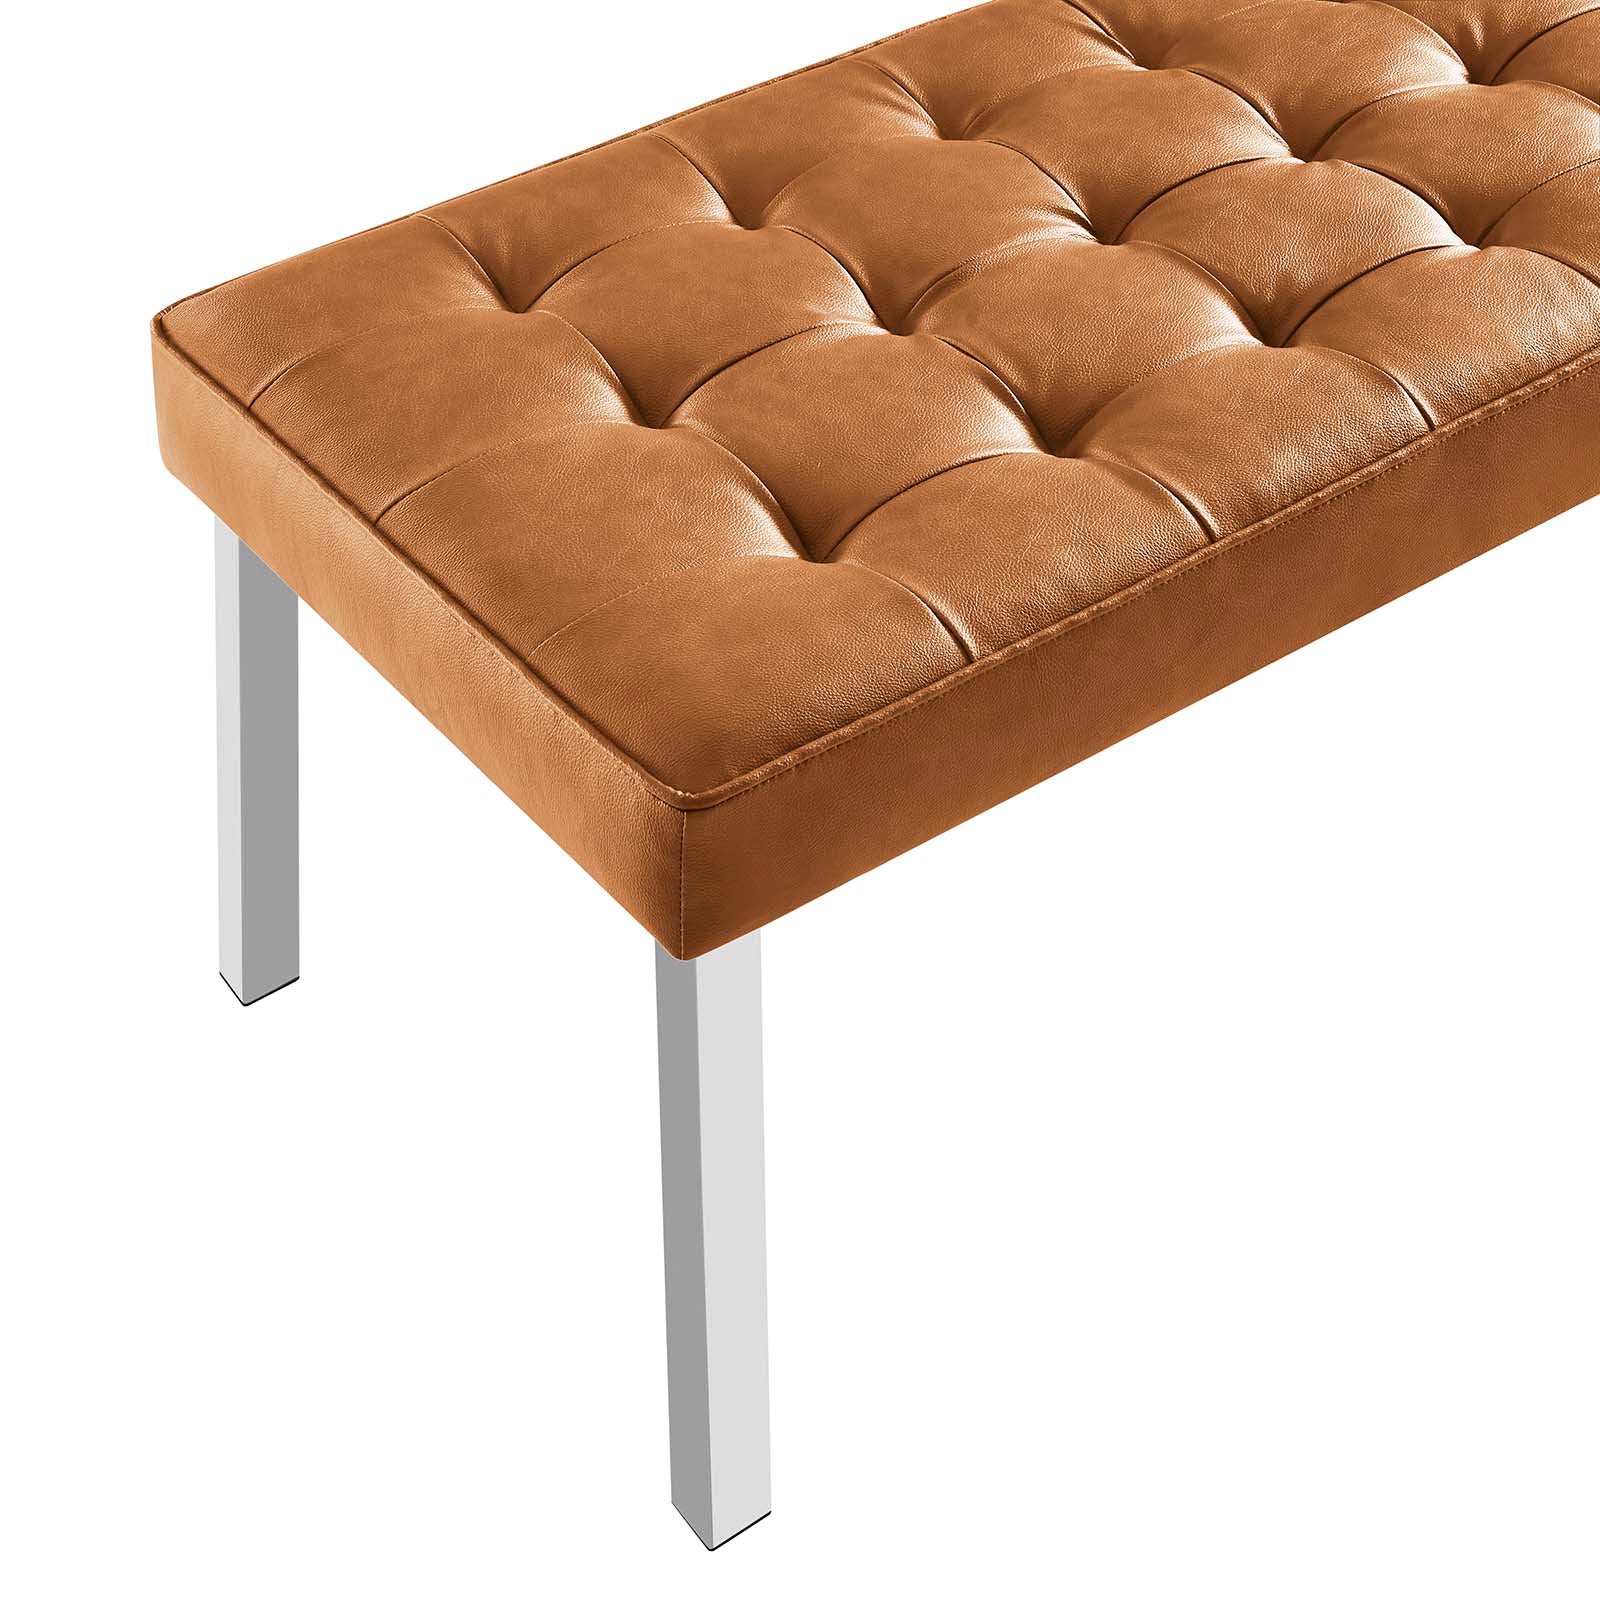 Modway Benches - Loft Tufted Large Upholstered Faux Leather Bench Silver Tan